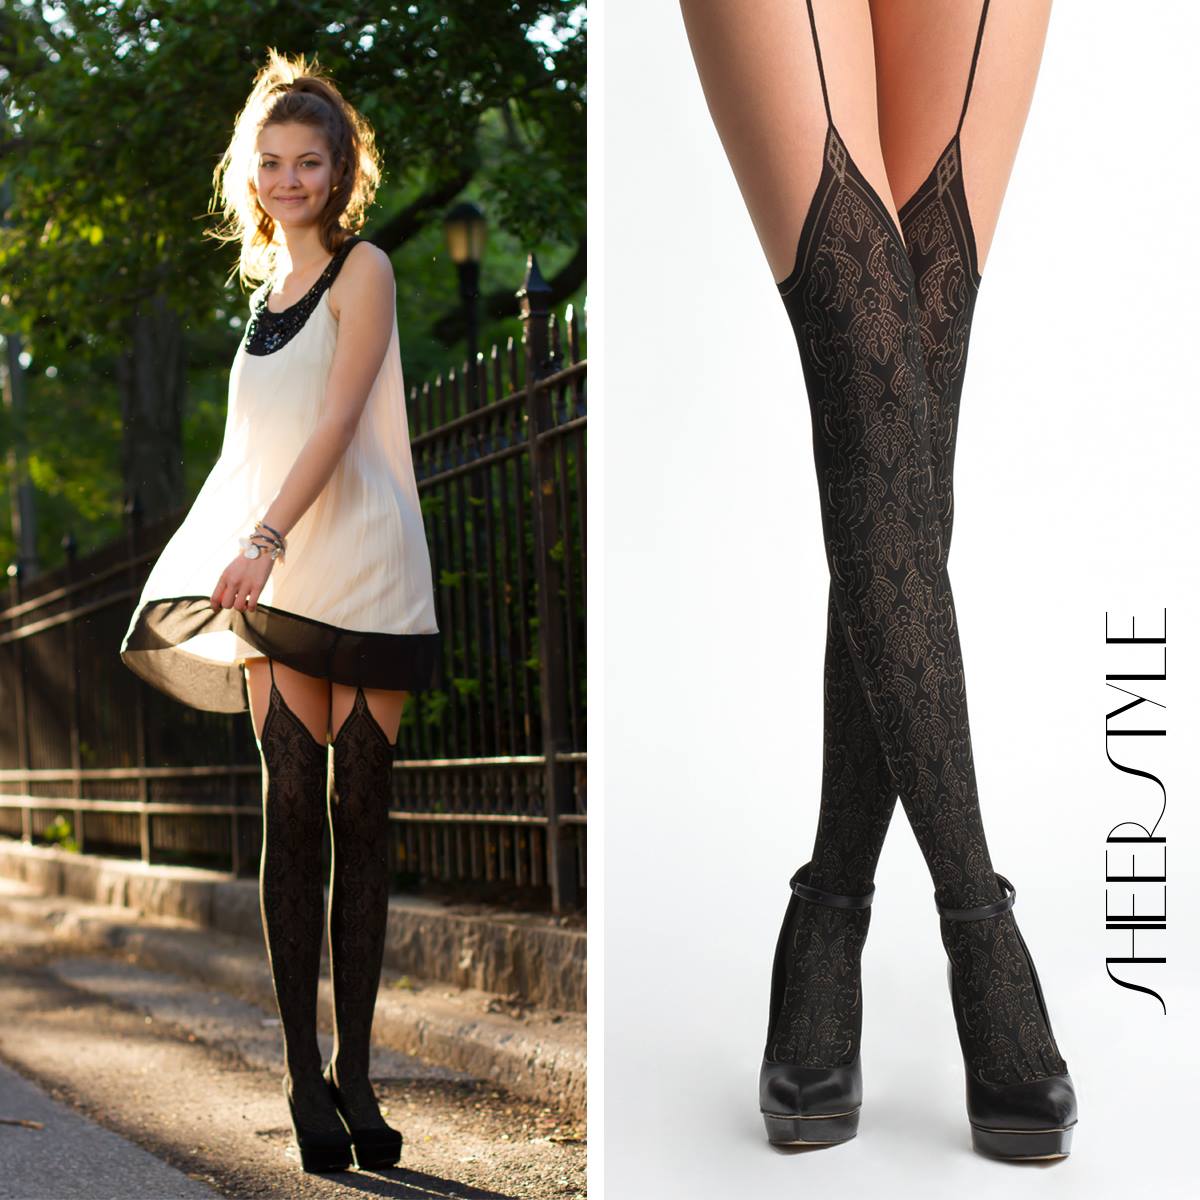 Turn heads in these fashion stockings